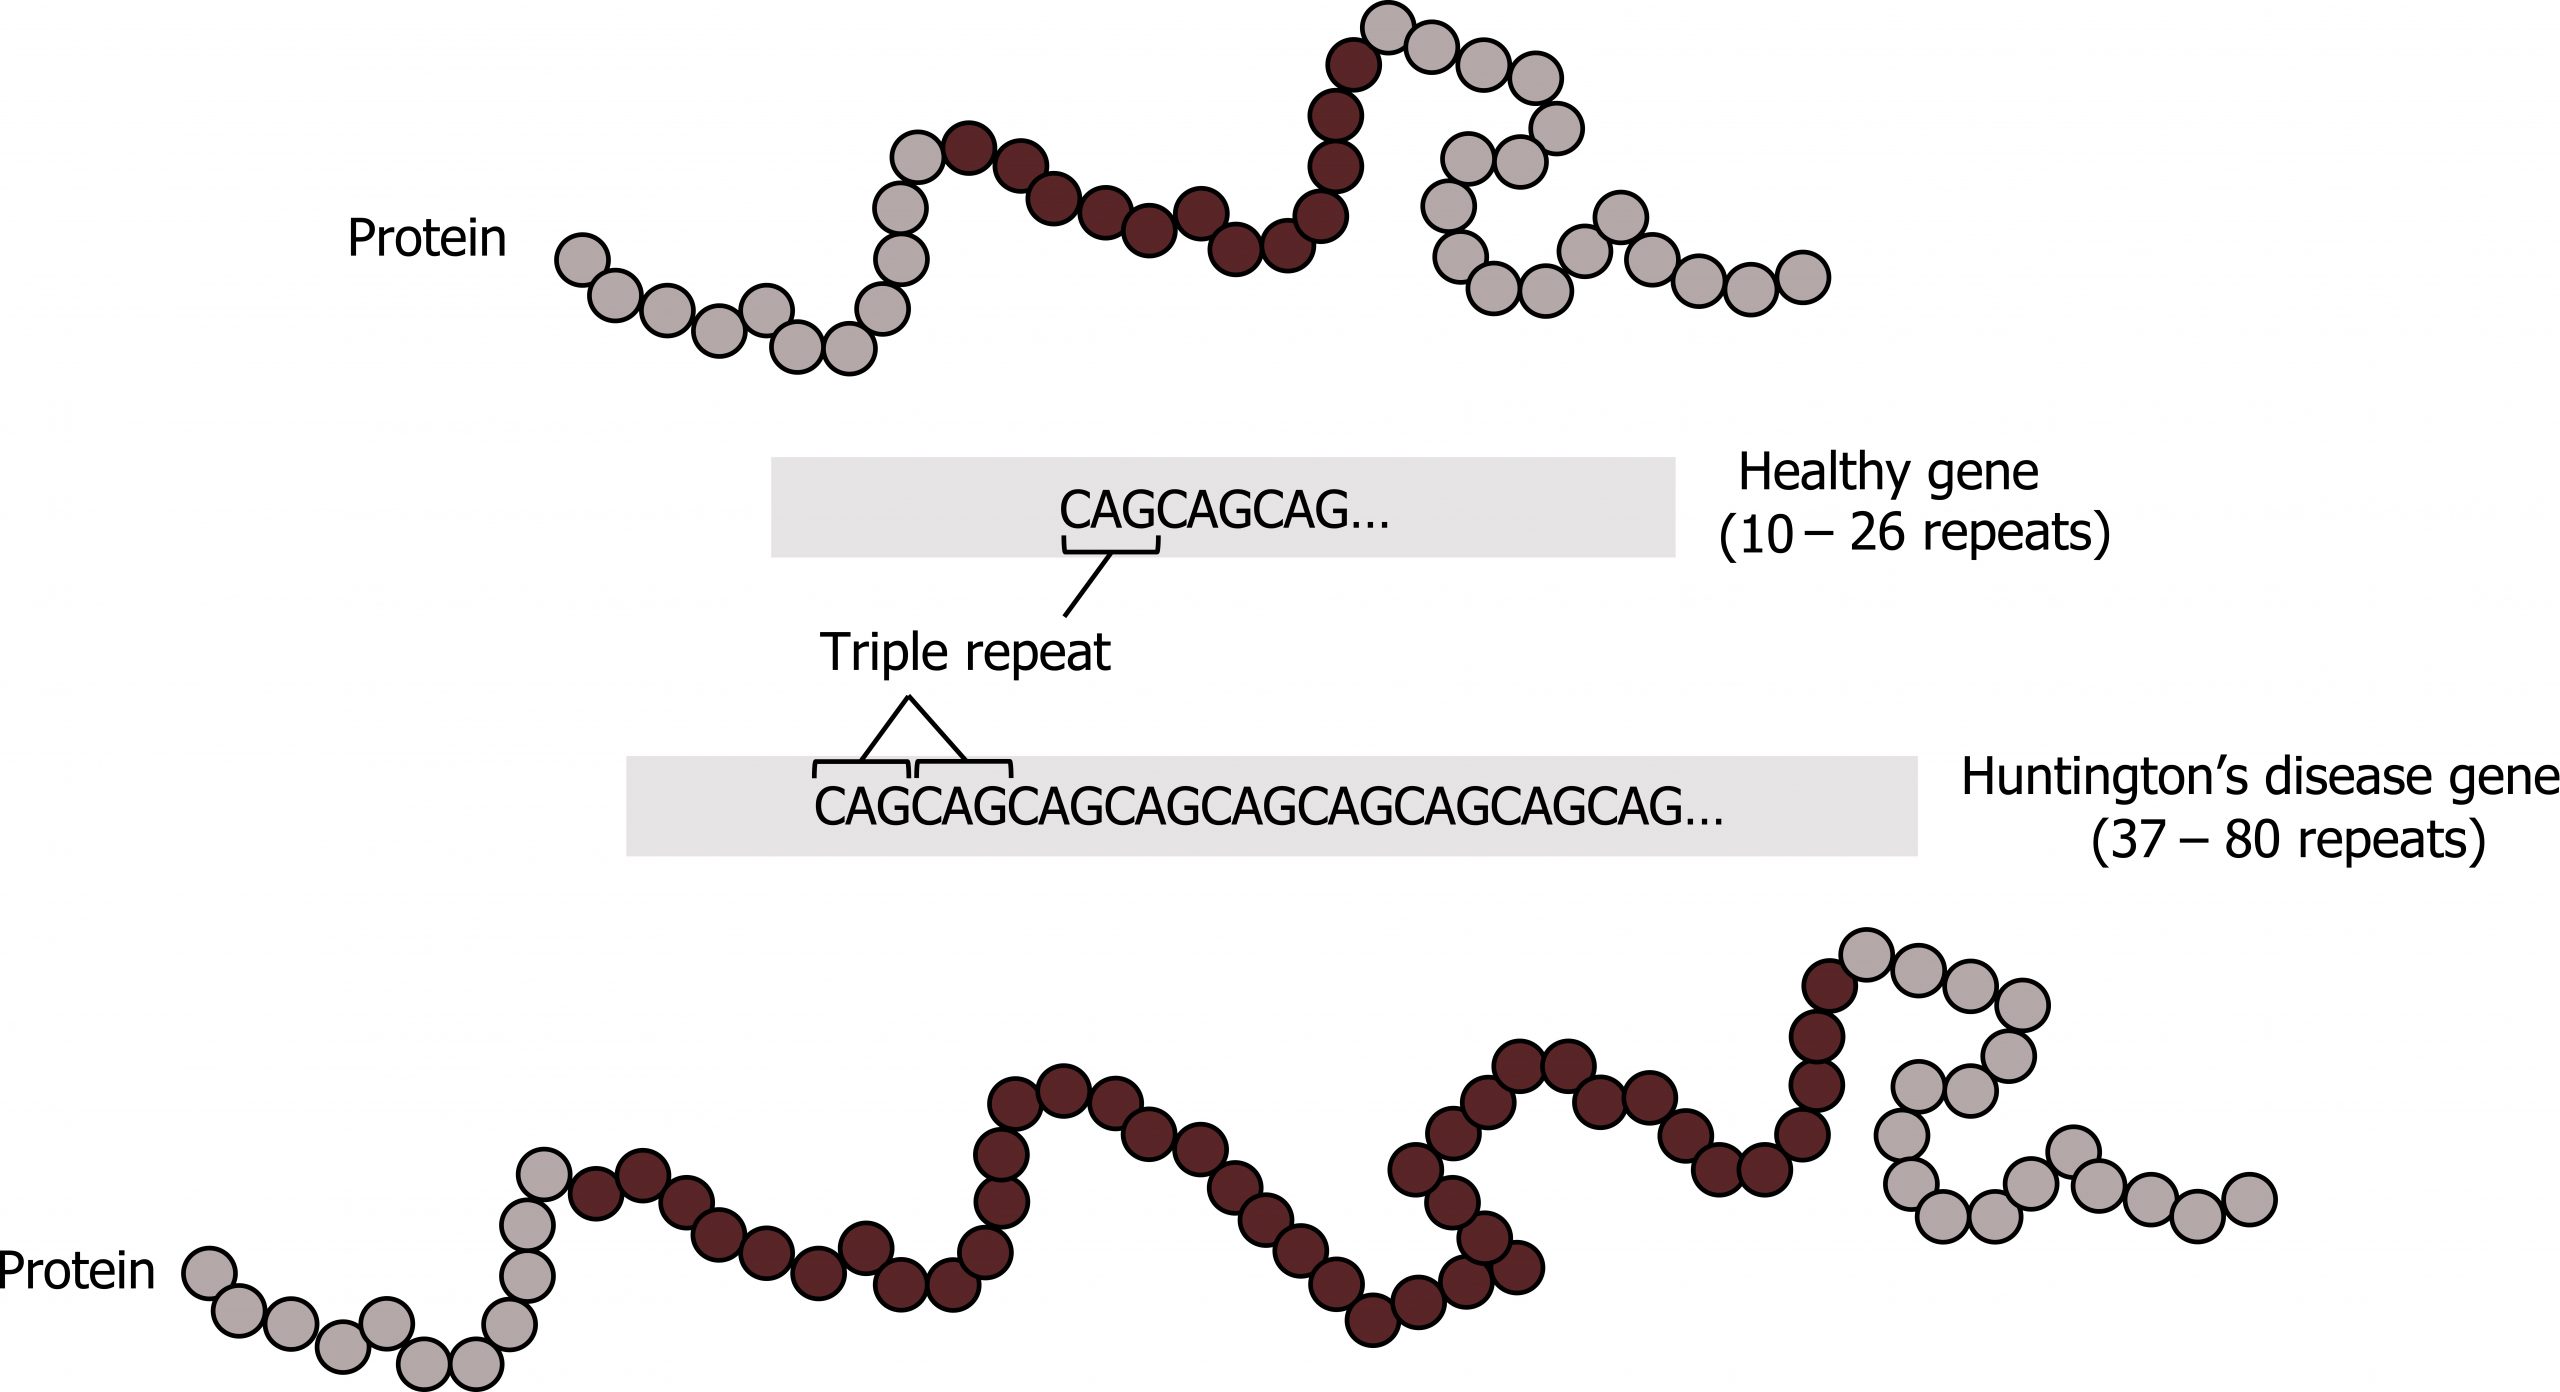 Protein with the healthy gene (10-26 repeats) of CAG. Protein with Huntington’s disease gene (37-80 repeats) of CAG.